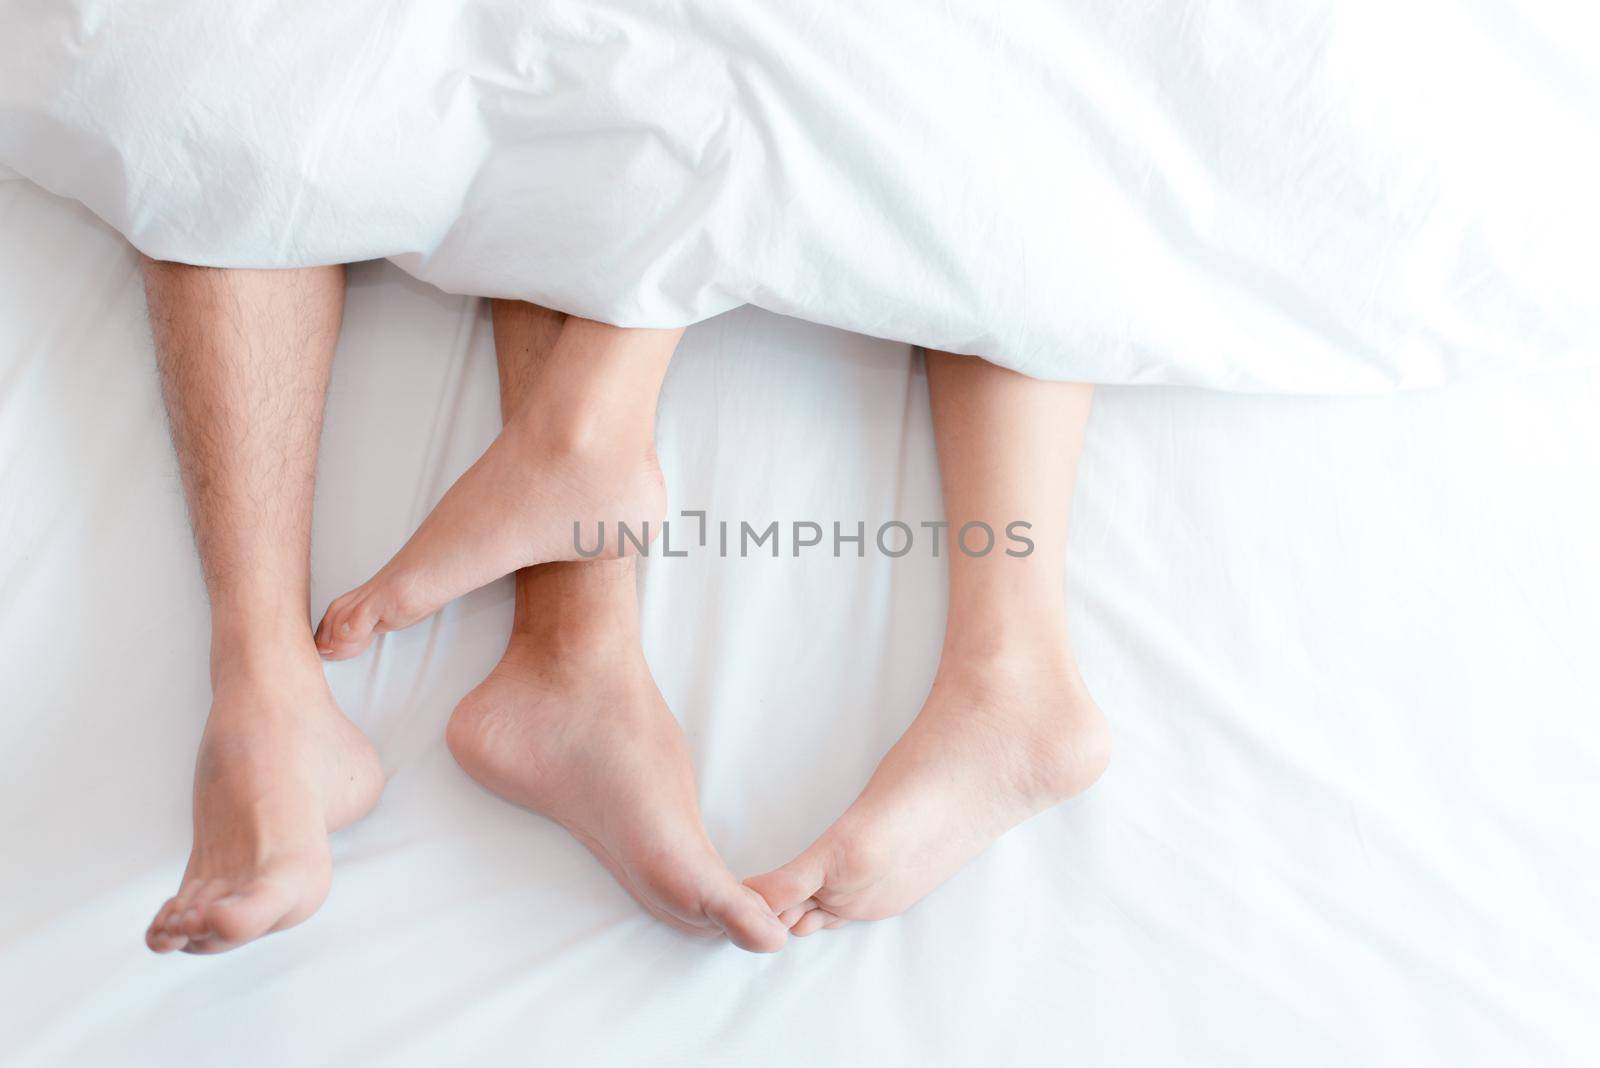 Closeup feet of couple on the bed. Man and woman lovers make love under the blanket or bed sheet. Sex on vacation theme. Valentine and Honeymoon concept. by MiniStocker